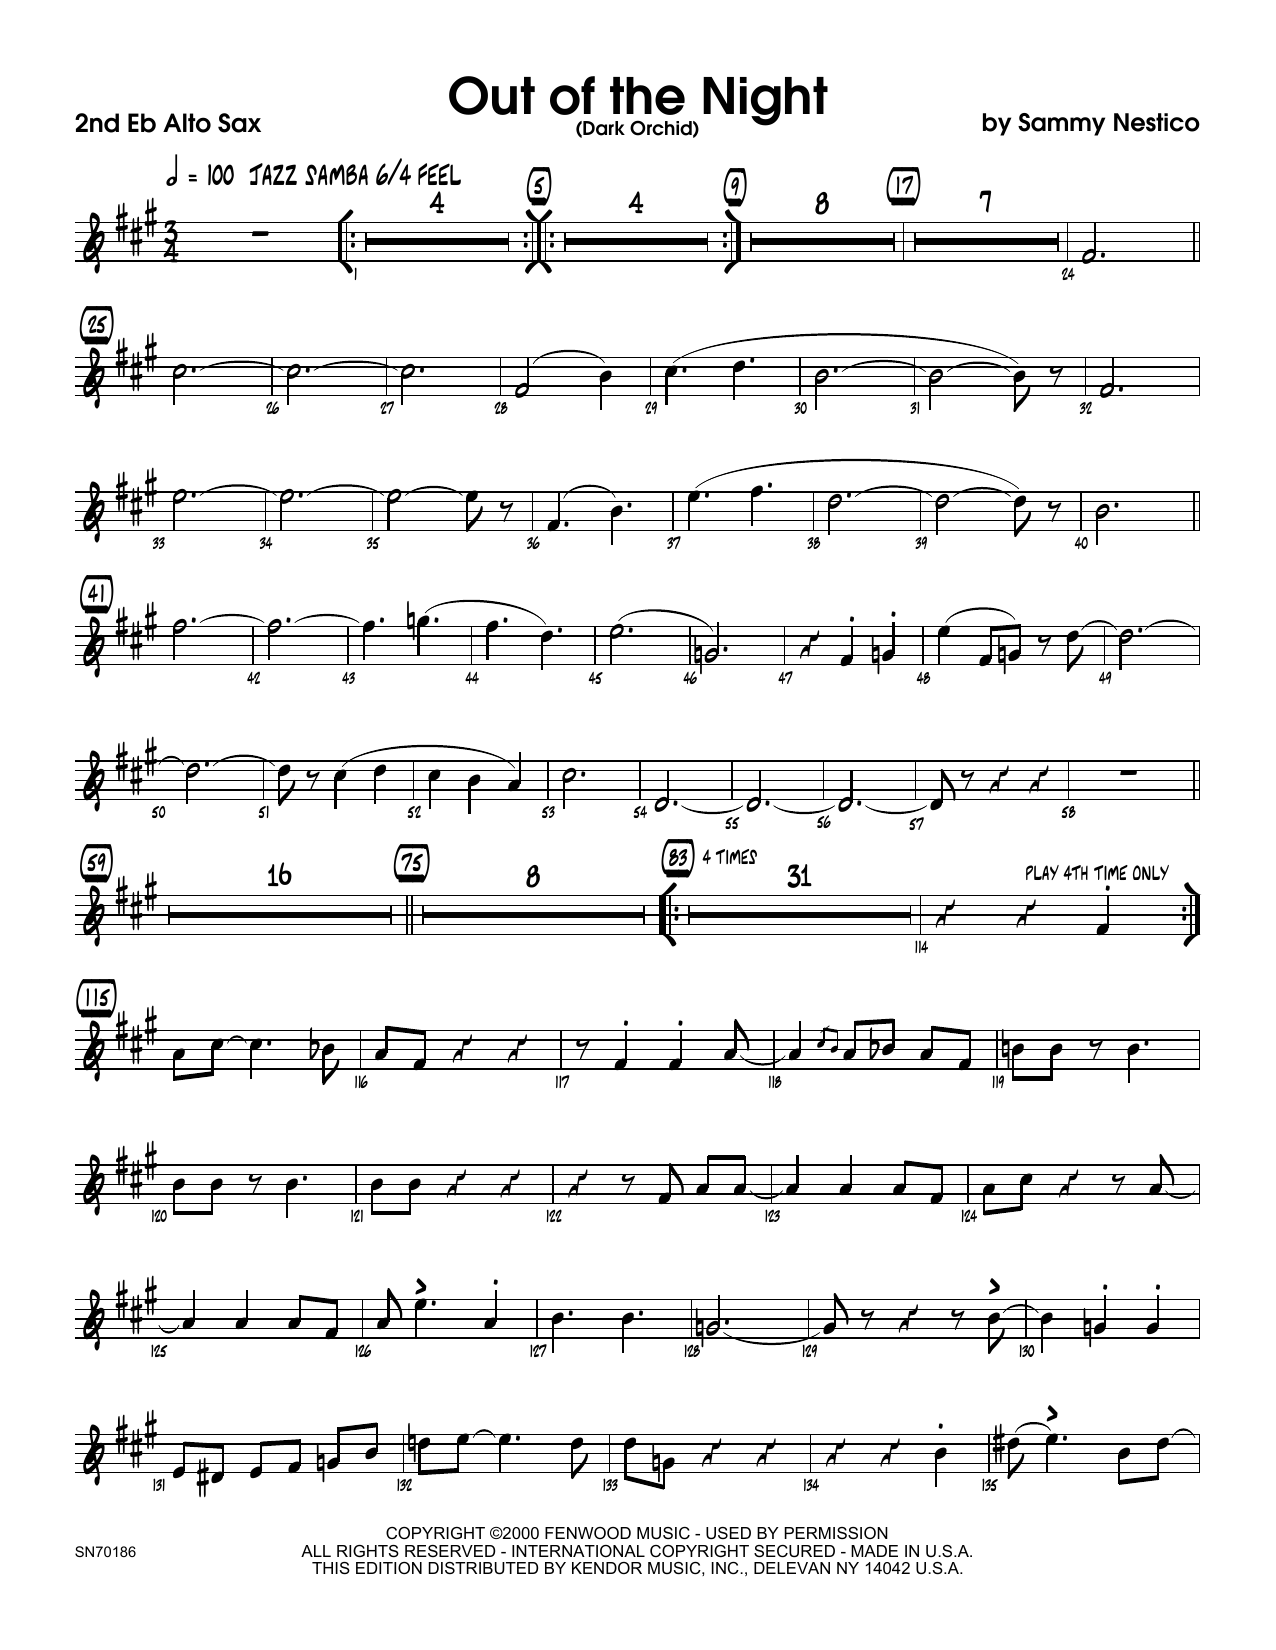 Download Sammy Nestico Out of the Night - 2nd Eb Alto Saxophon Sheet Music